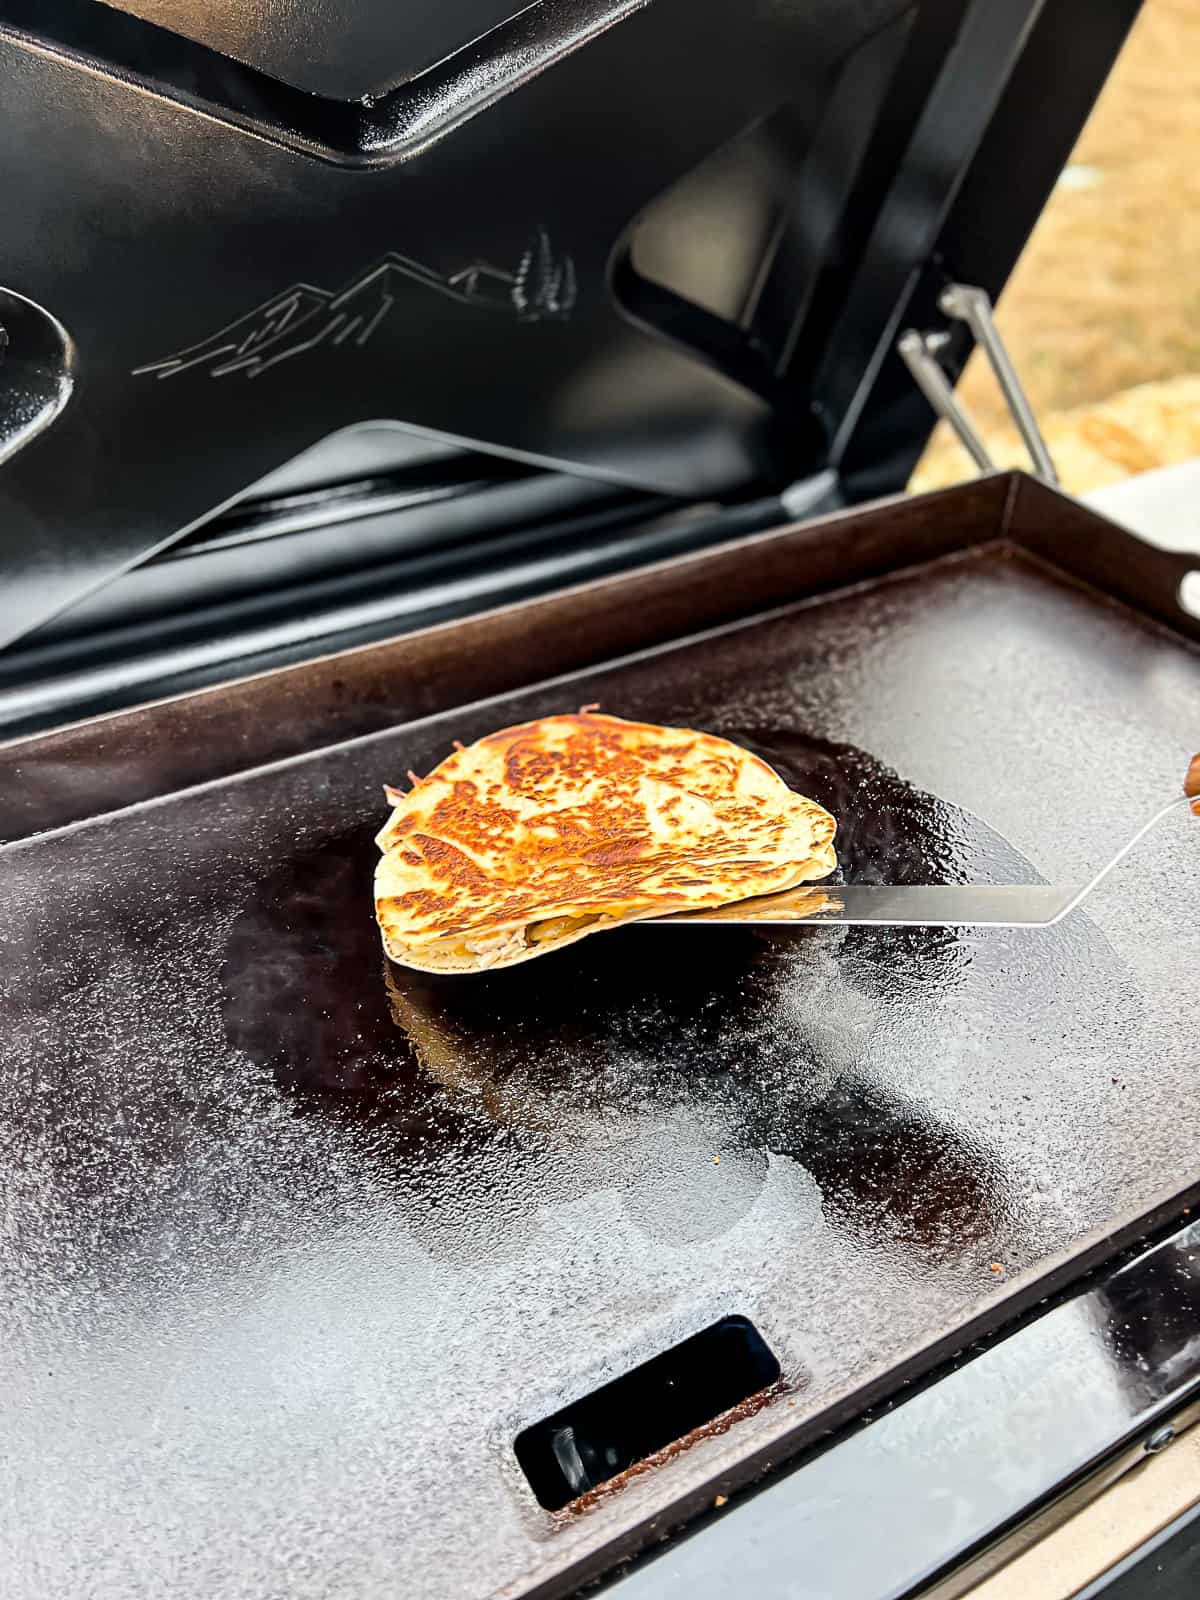 Melted cheese inside quesadilla cooking on a Traeger Flatrock griddle grill